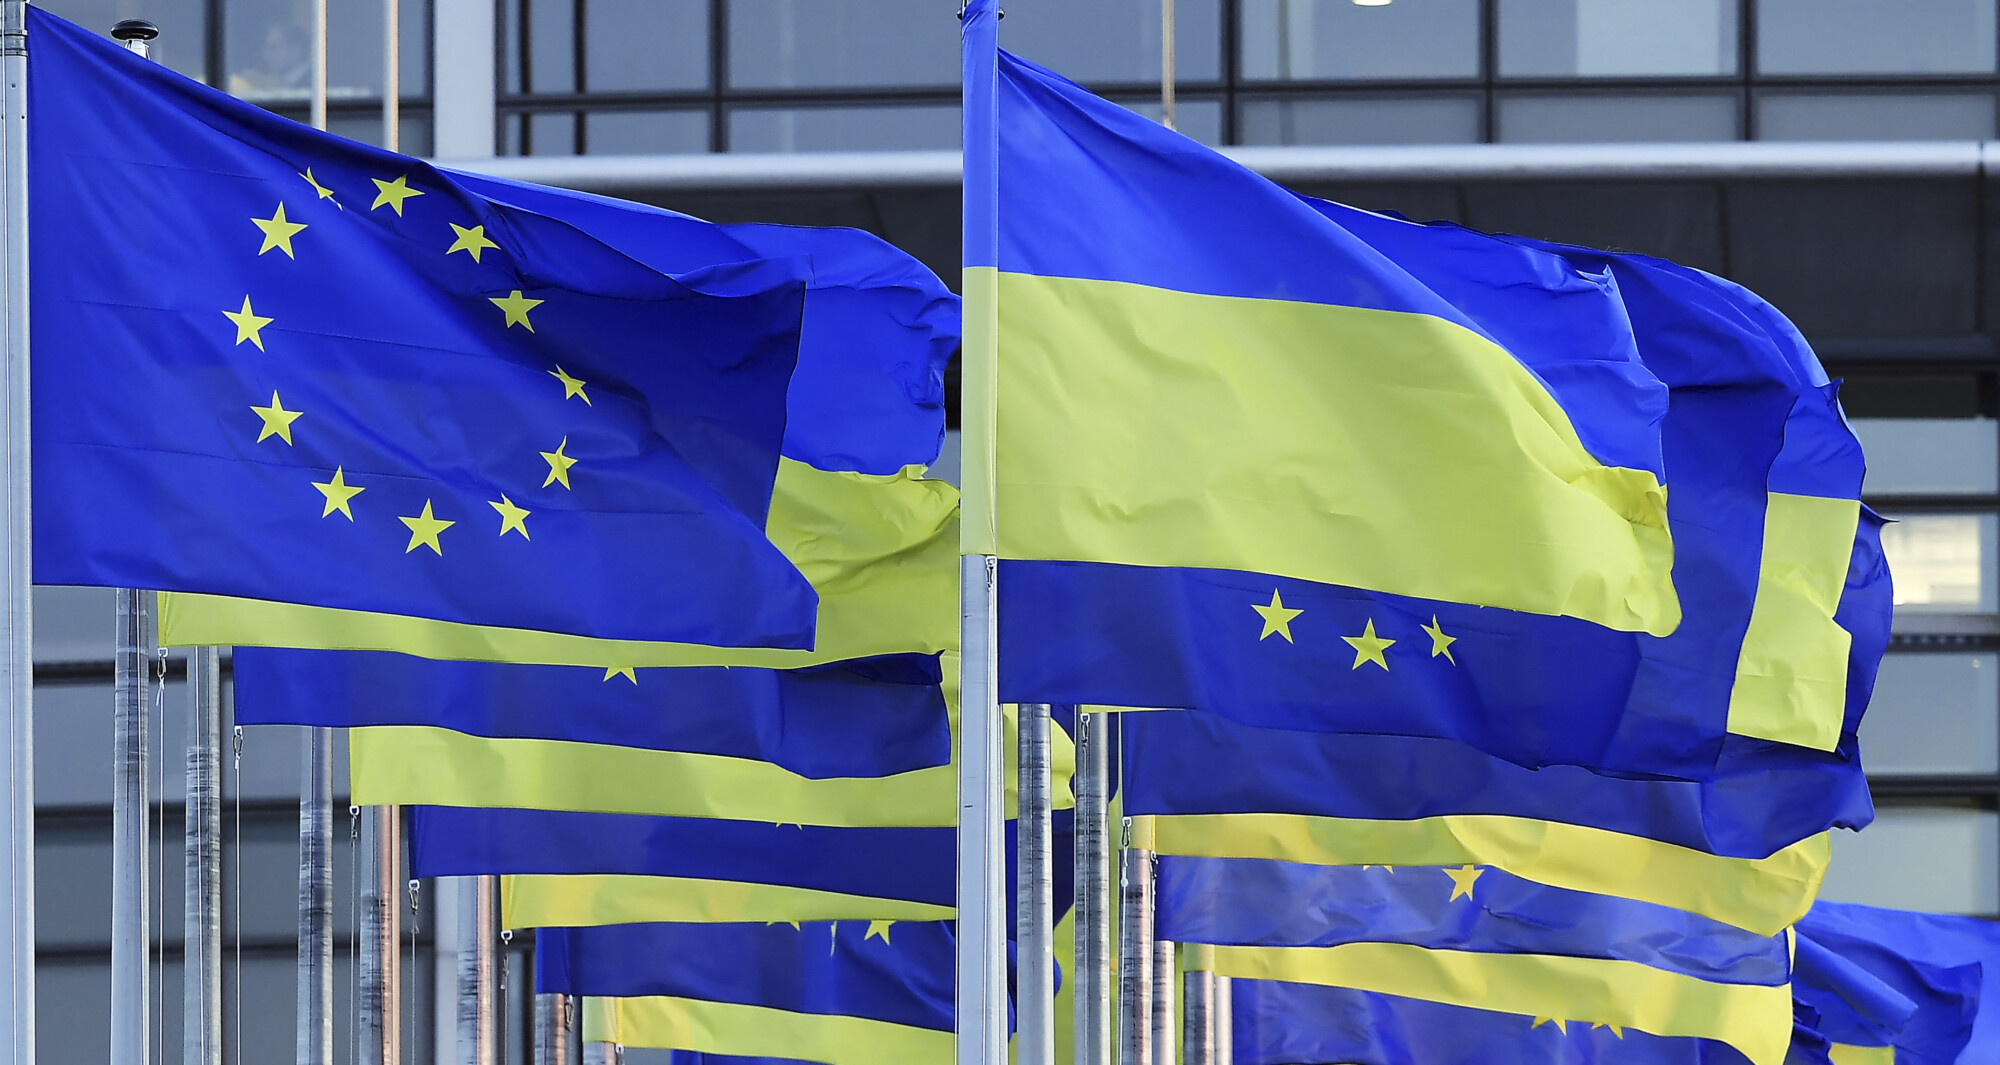 Russia-Ukraine (March 14): EU Imposes 4th Set of Sanctions Against Russia for War